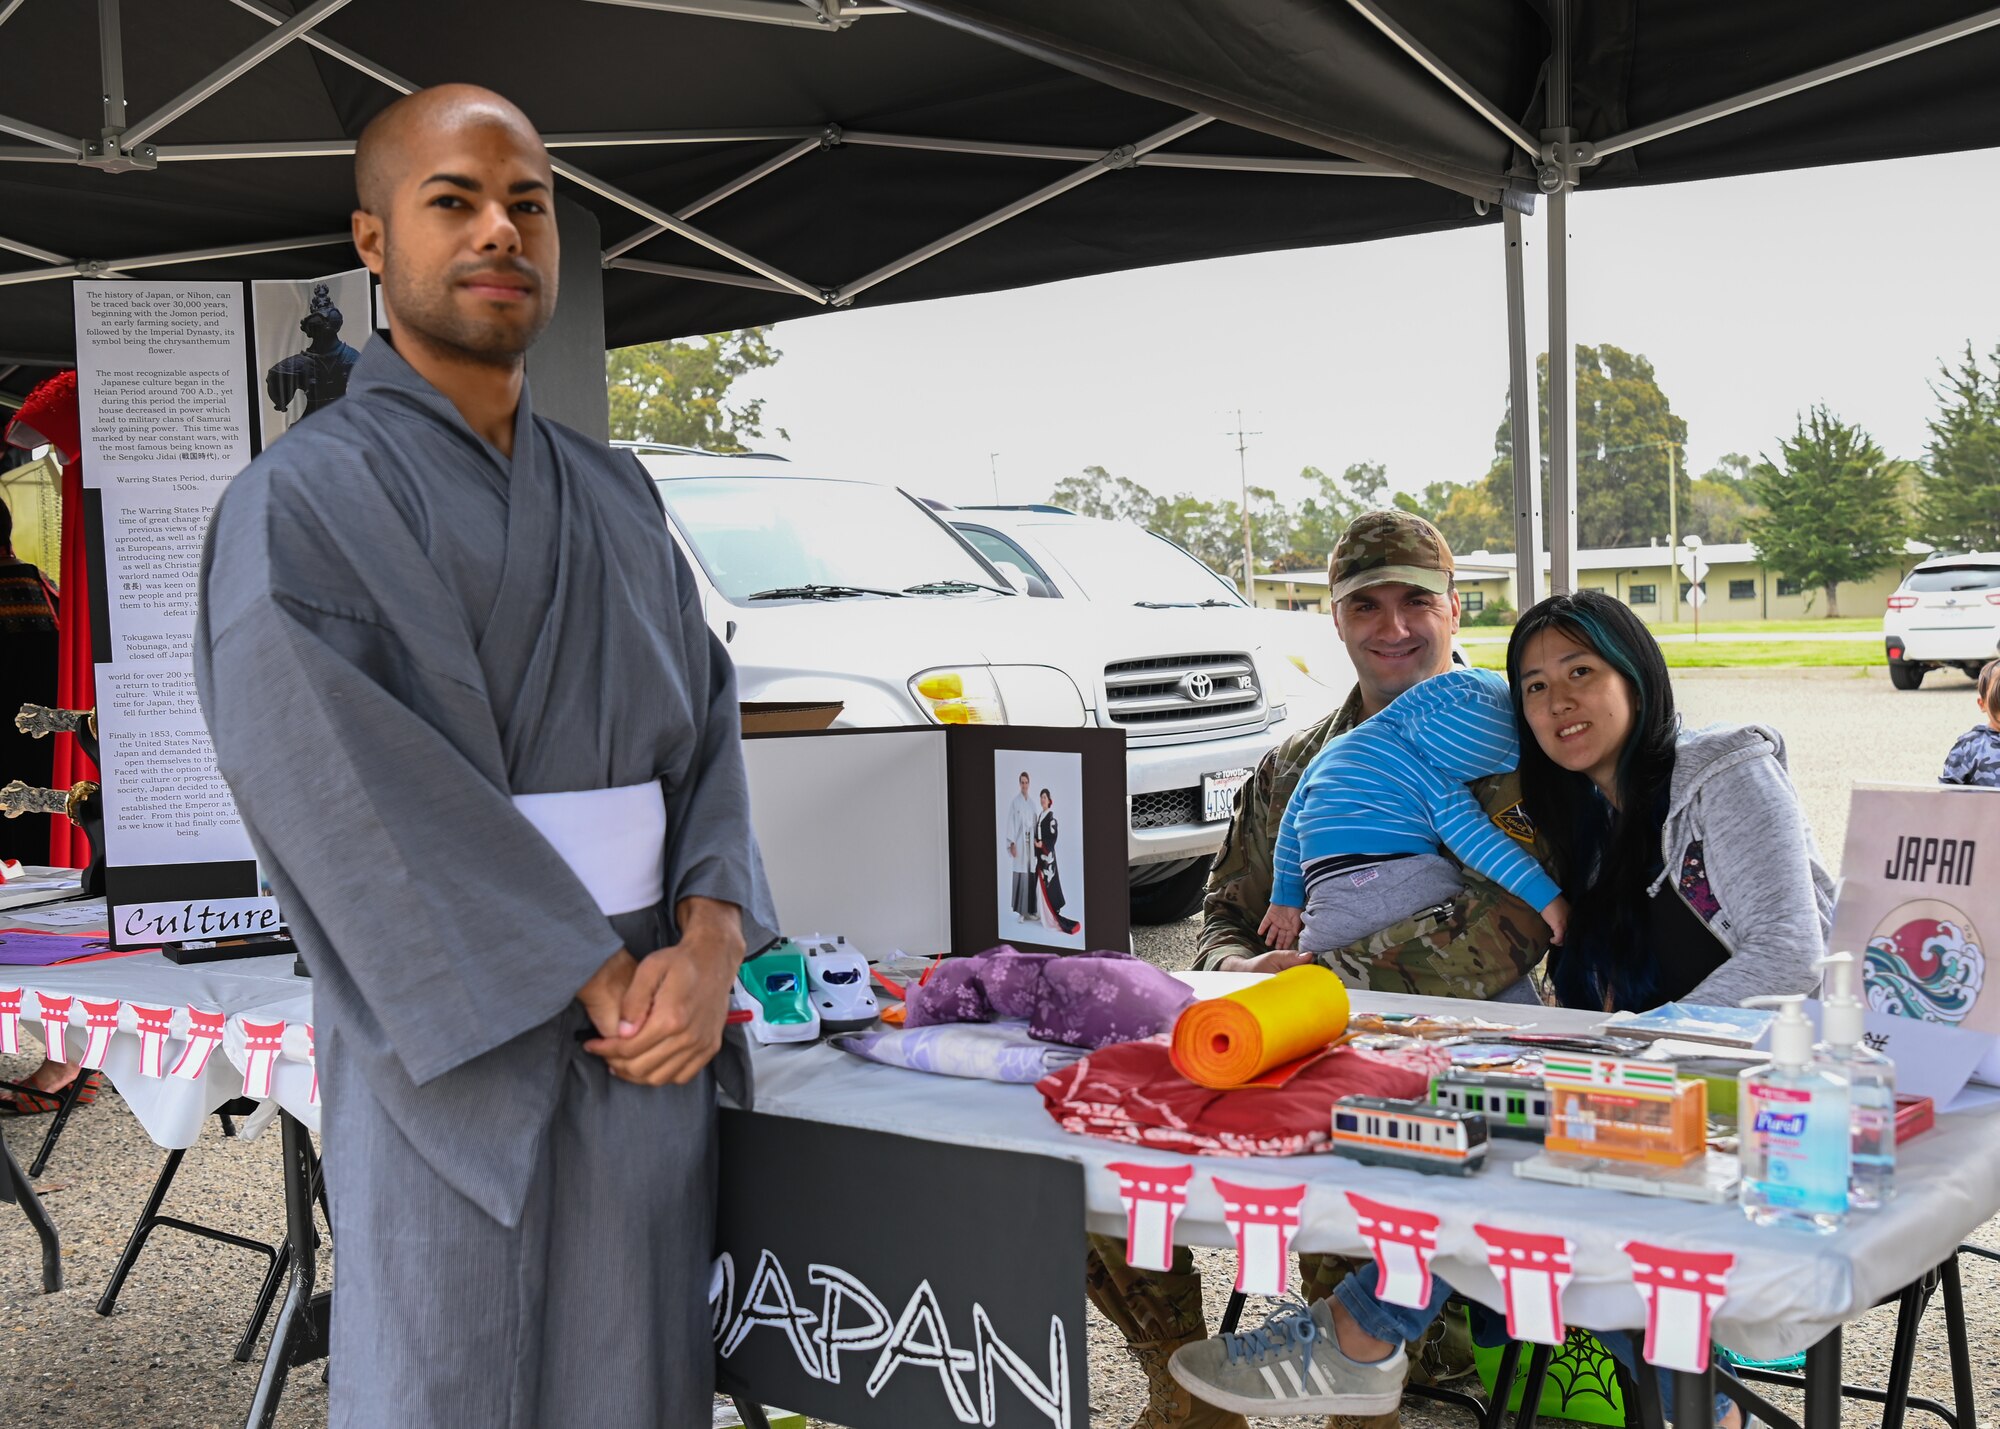 Members of Vandenberg hosts an “Around the World'' passport event at Vandenberg Space Force Base, Calif., May 19, 2023. Members enjoyed visiting and learning about a variety of culturally-themed booths, each one showcasing a different heritage. (U.S. Space Force photo by Senior Airman Tiarra Sibley)